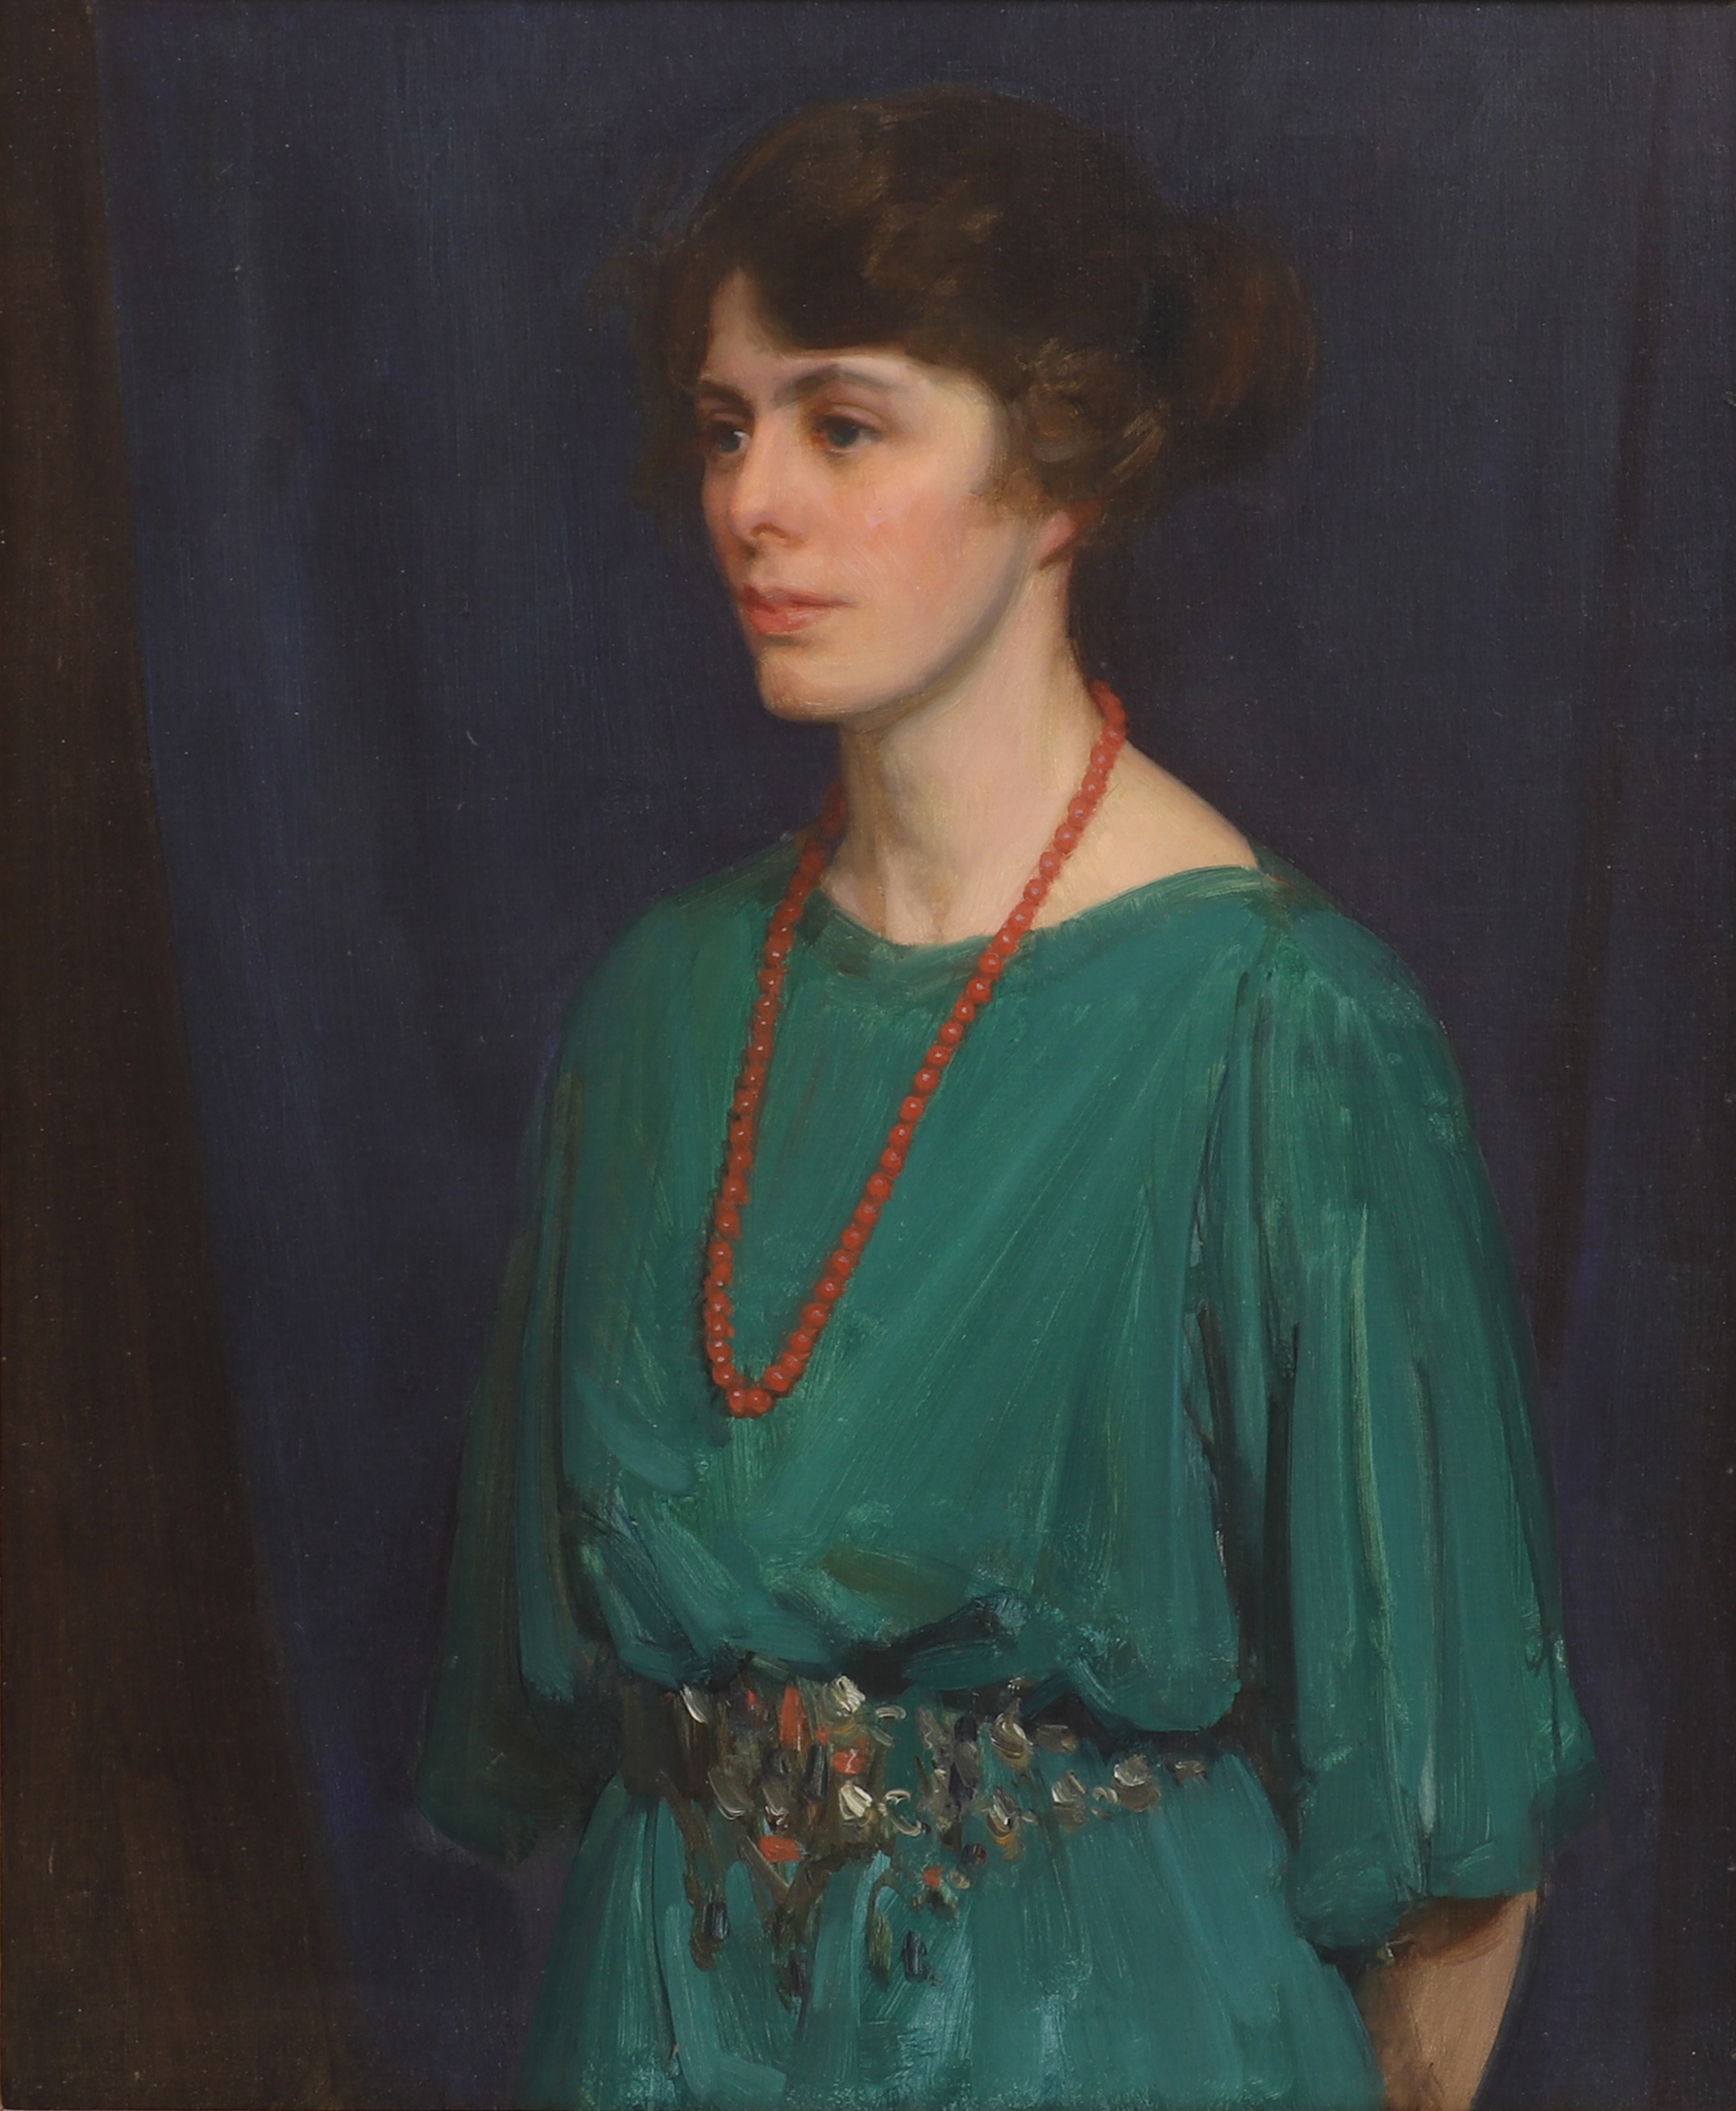 Harold Speed (1872-1957) 'Lady in Green' signed and dated 'HAROLD SPEED 1919' l.l., oil on canvas 78 x 64cm (£600-800)